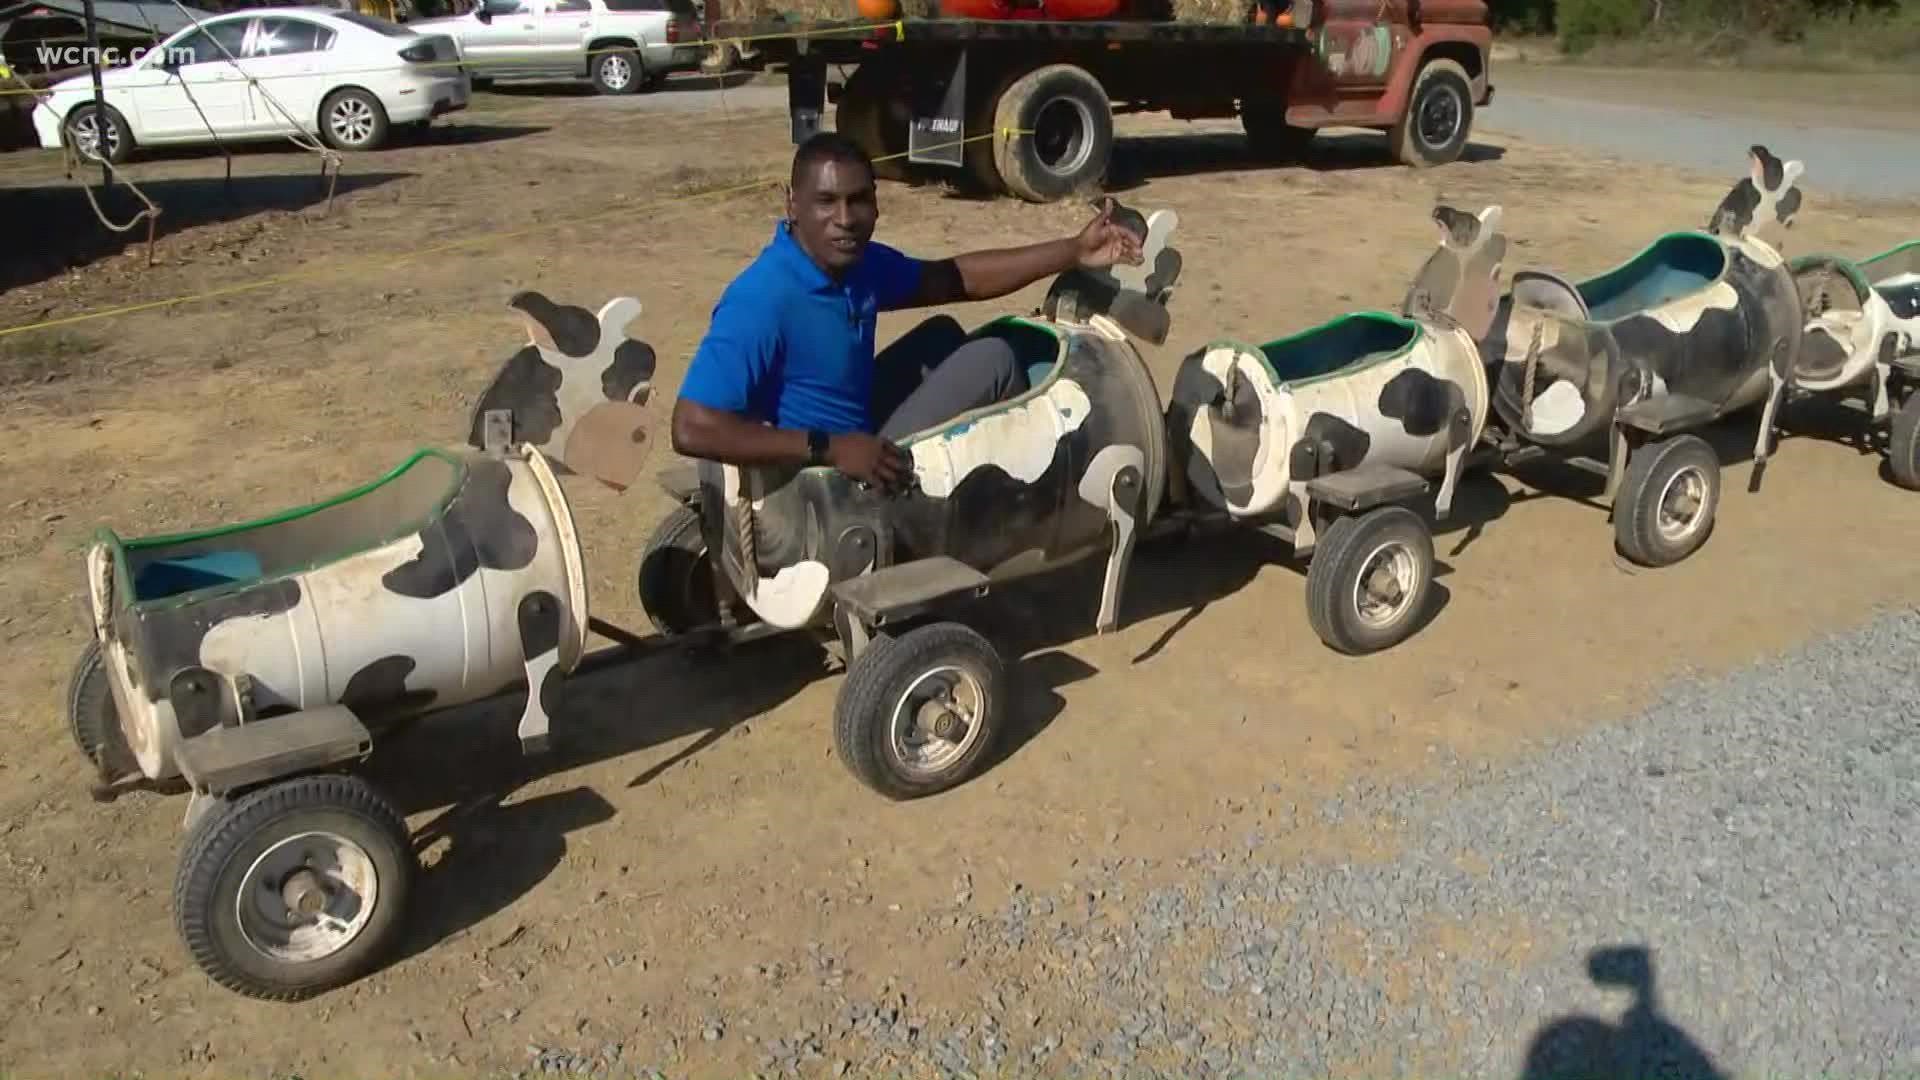 KJ Jacobs rides the cow train at Country Days Corn Maze.